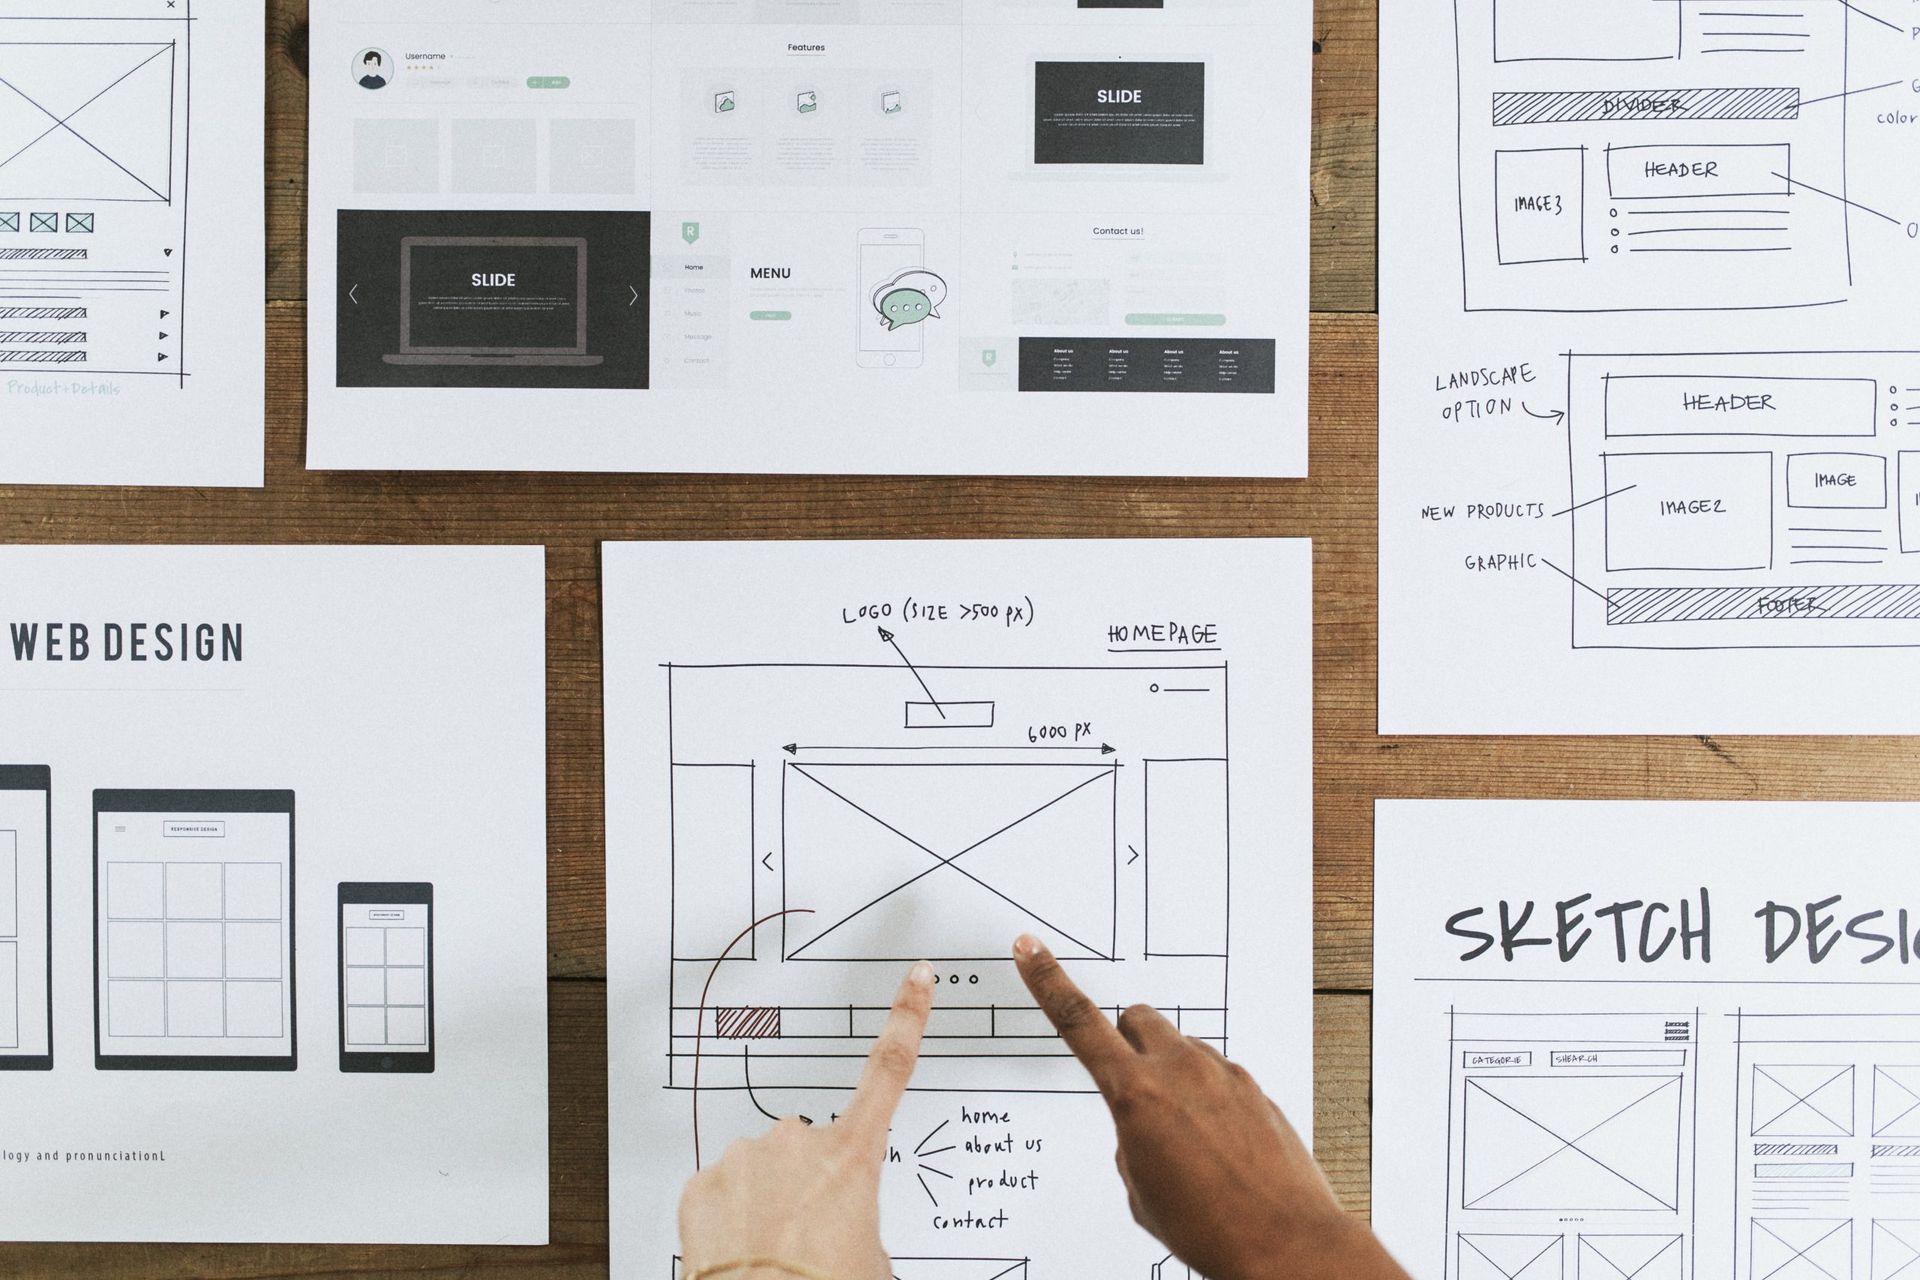 a hand points to sketches on a web design document